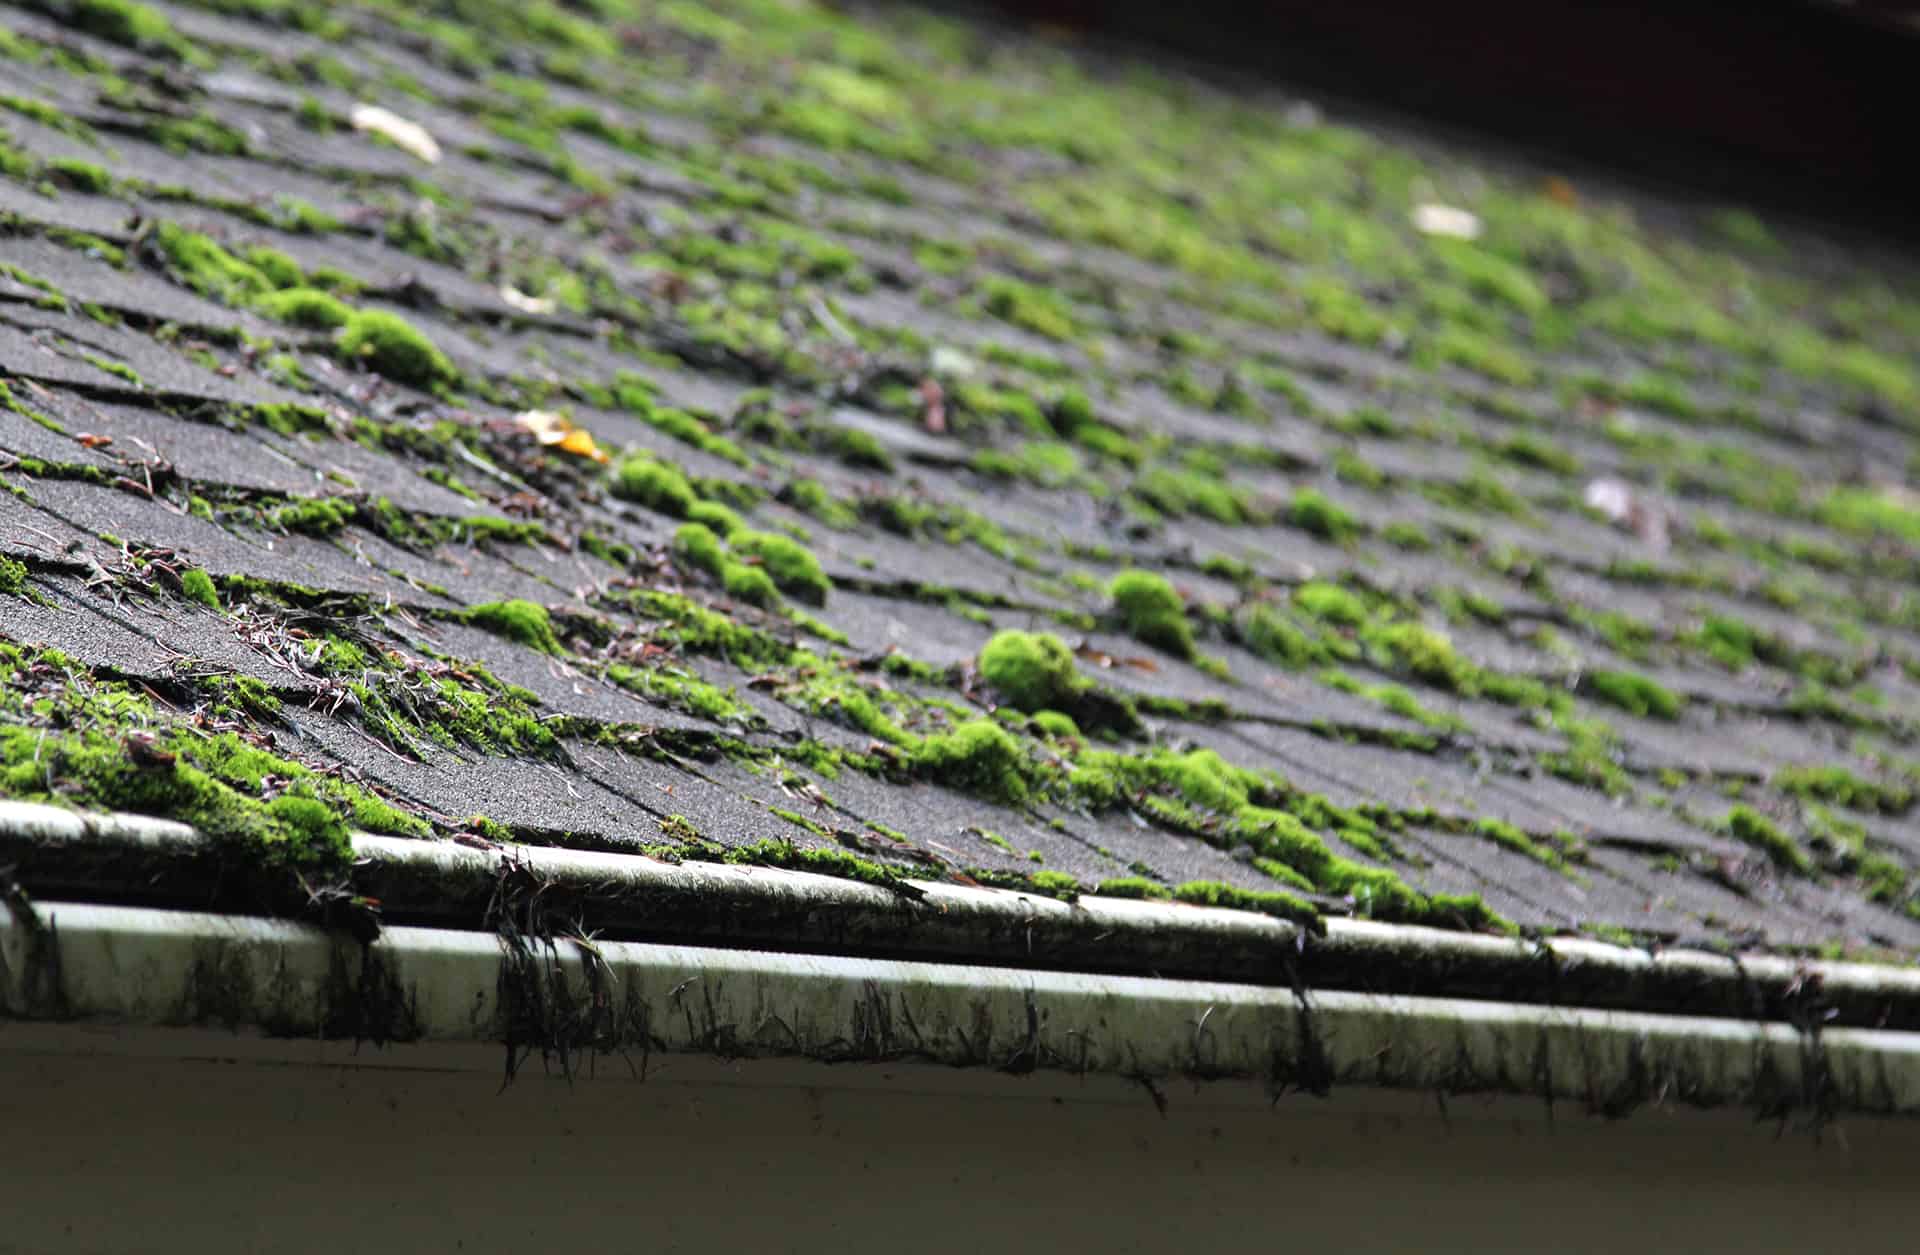 Mossy Roof